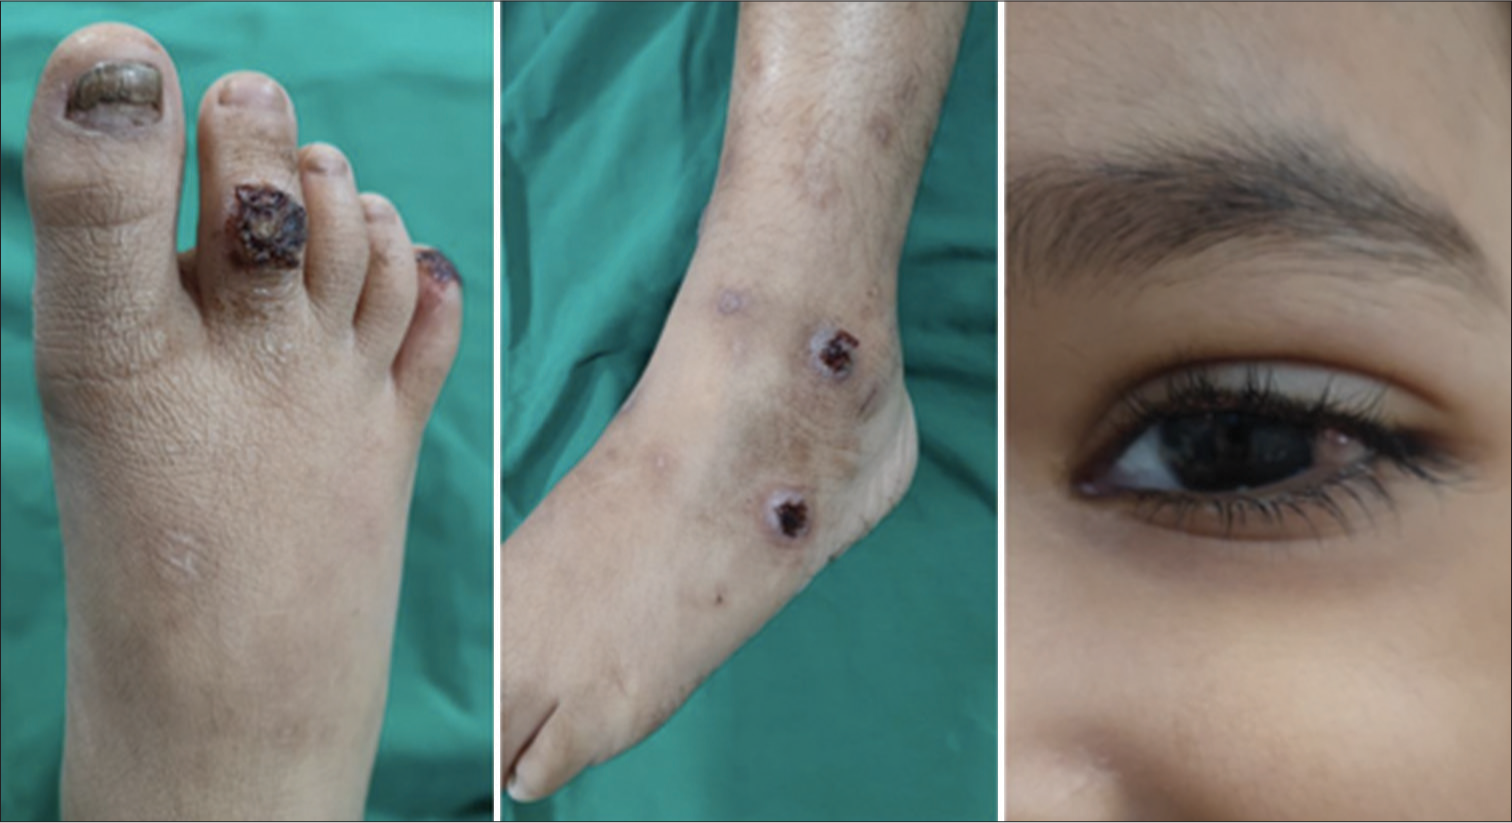 Anesthetic management of a child with a laryngeal mass associated with Laryngo-onycho-cutaneous syndrome